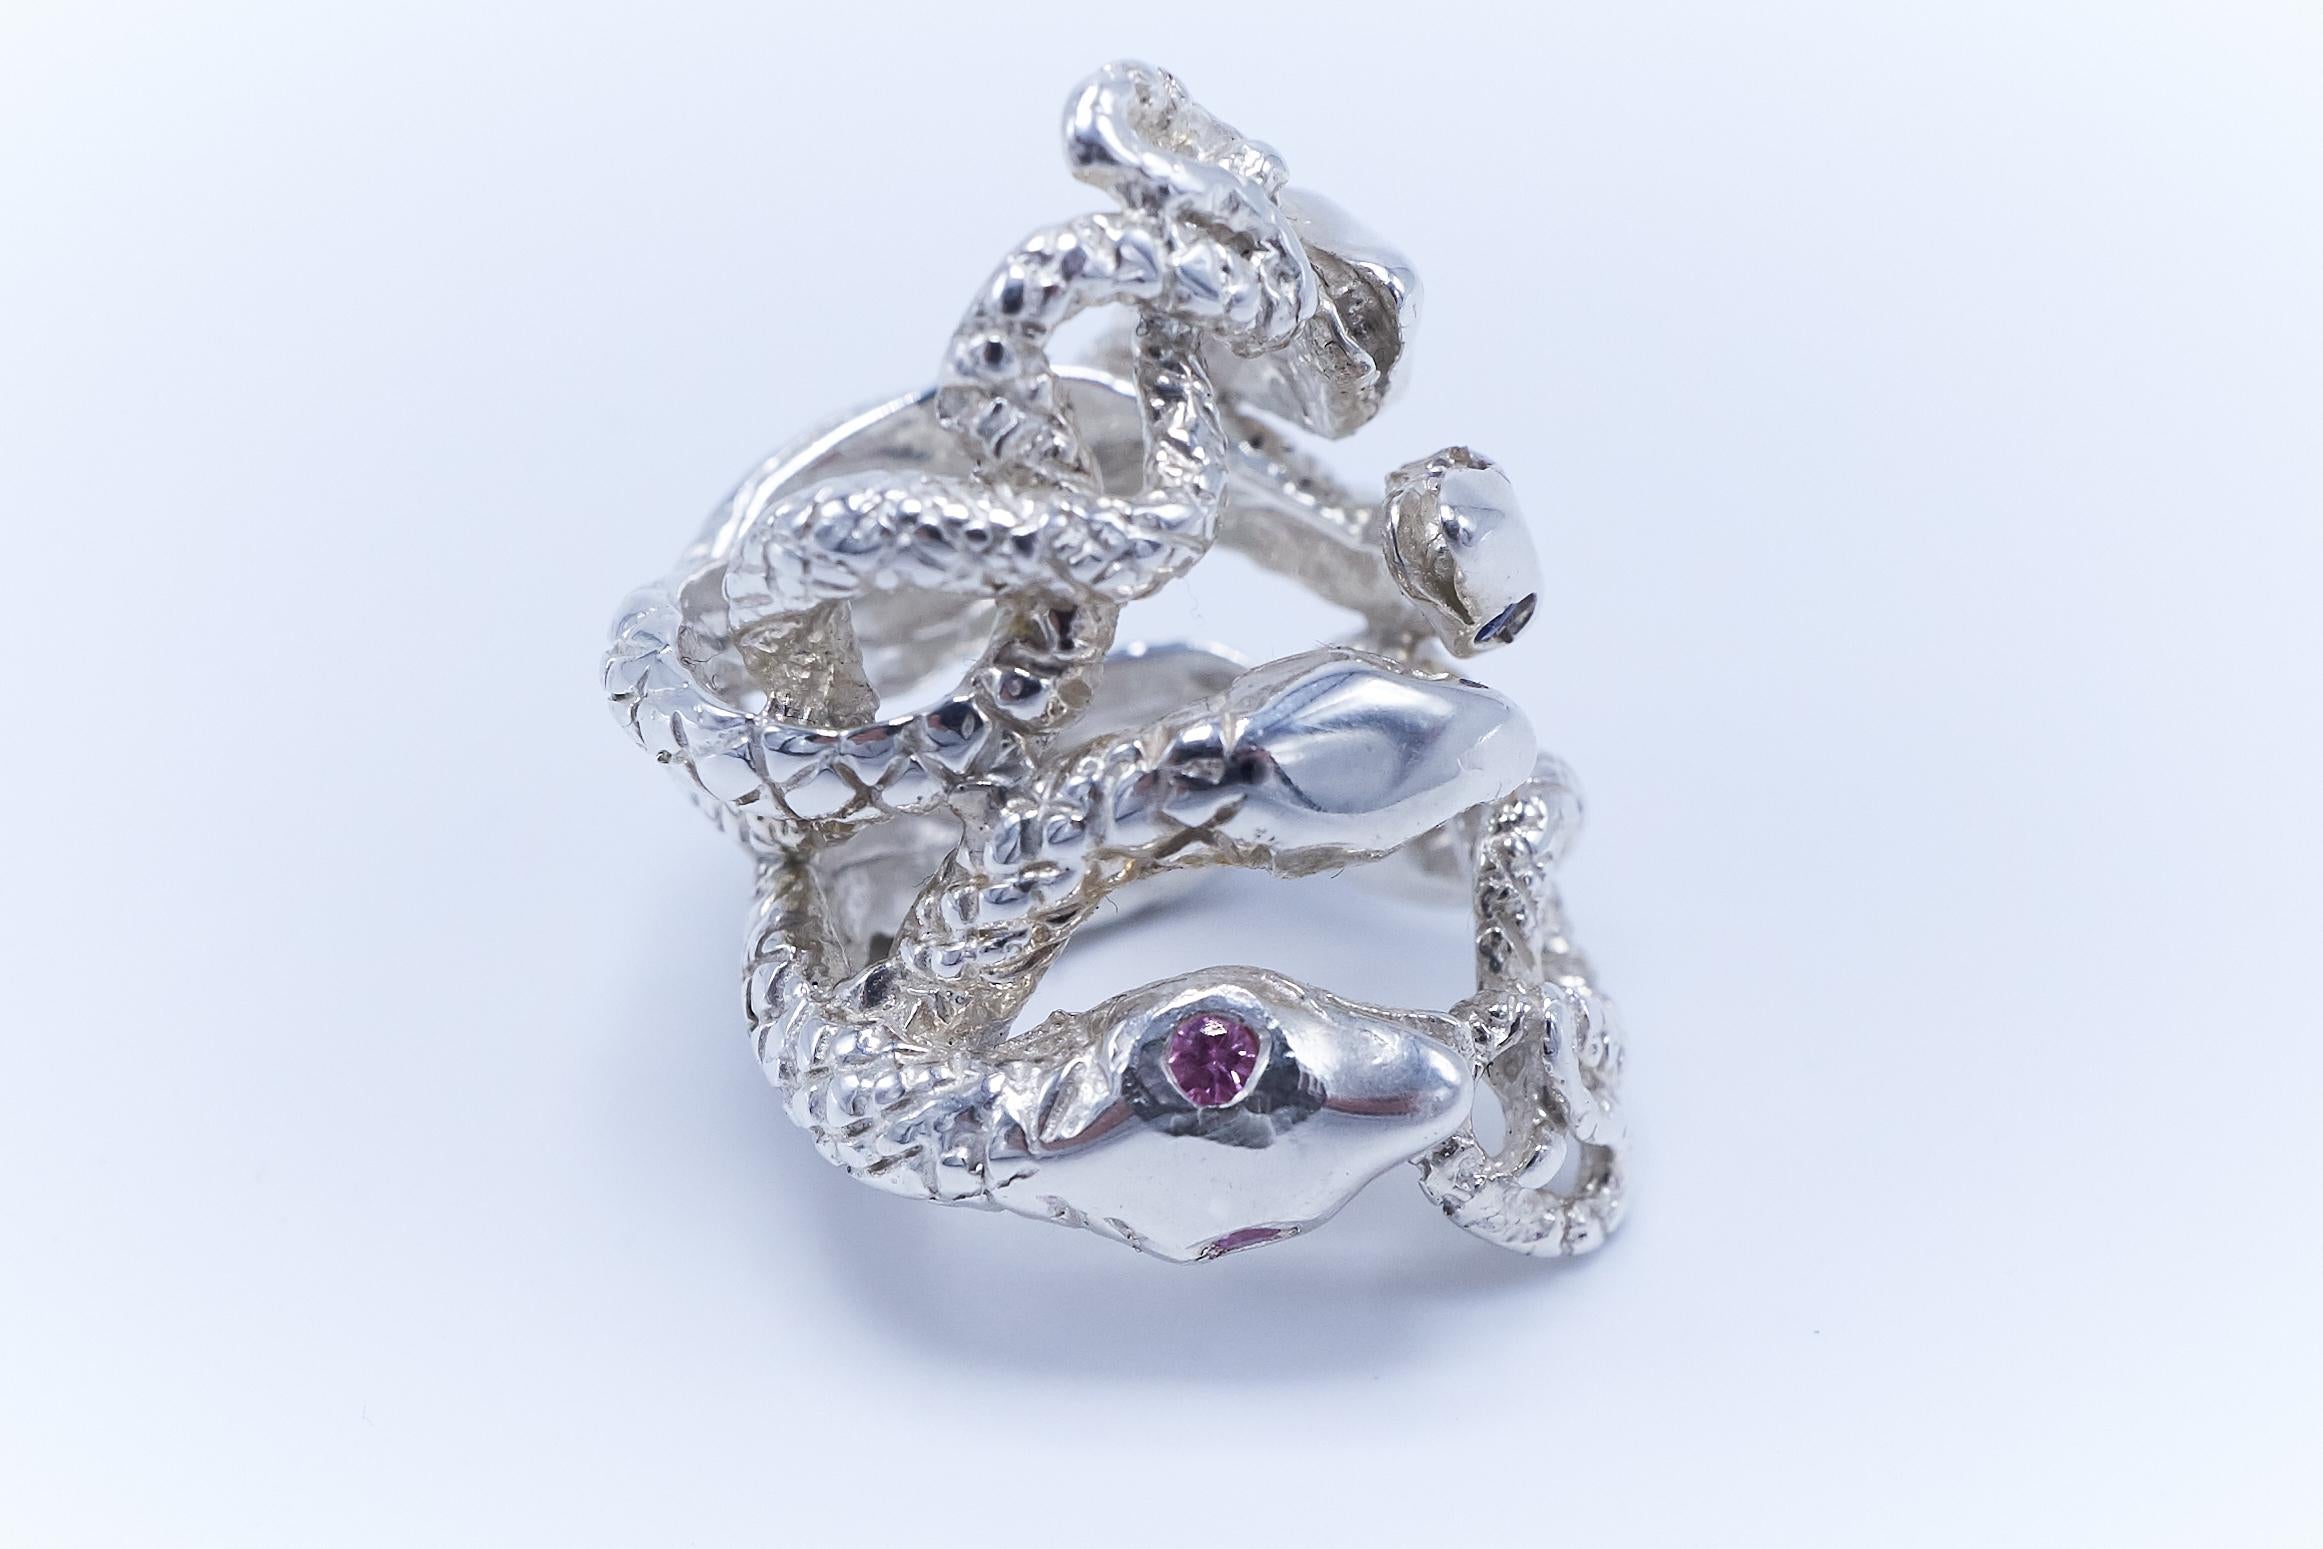 Brilliant Cut Diamond Emerald Pink Sapphire Snake Ring Sterling Silver Cocktail Ring J Dauphin For Sale